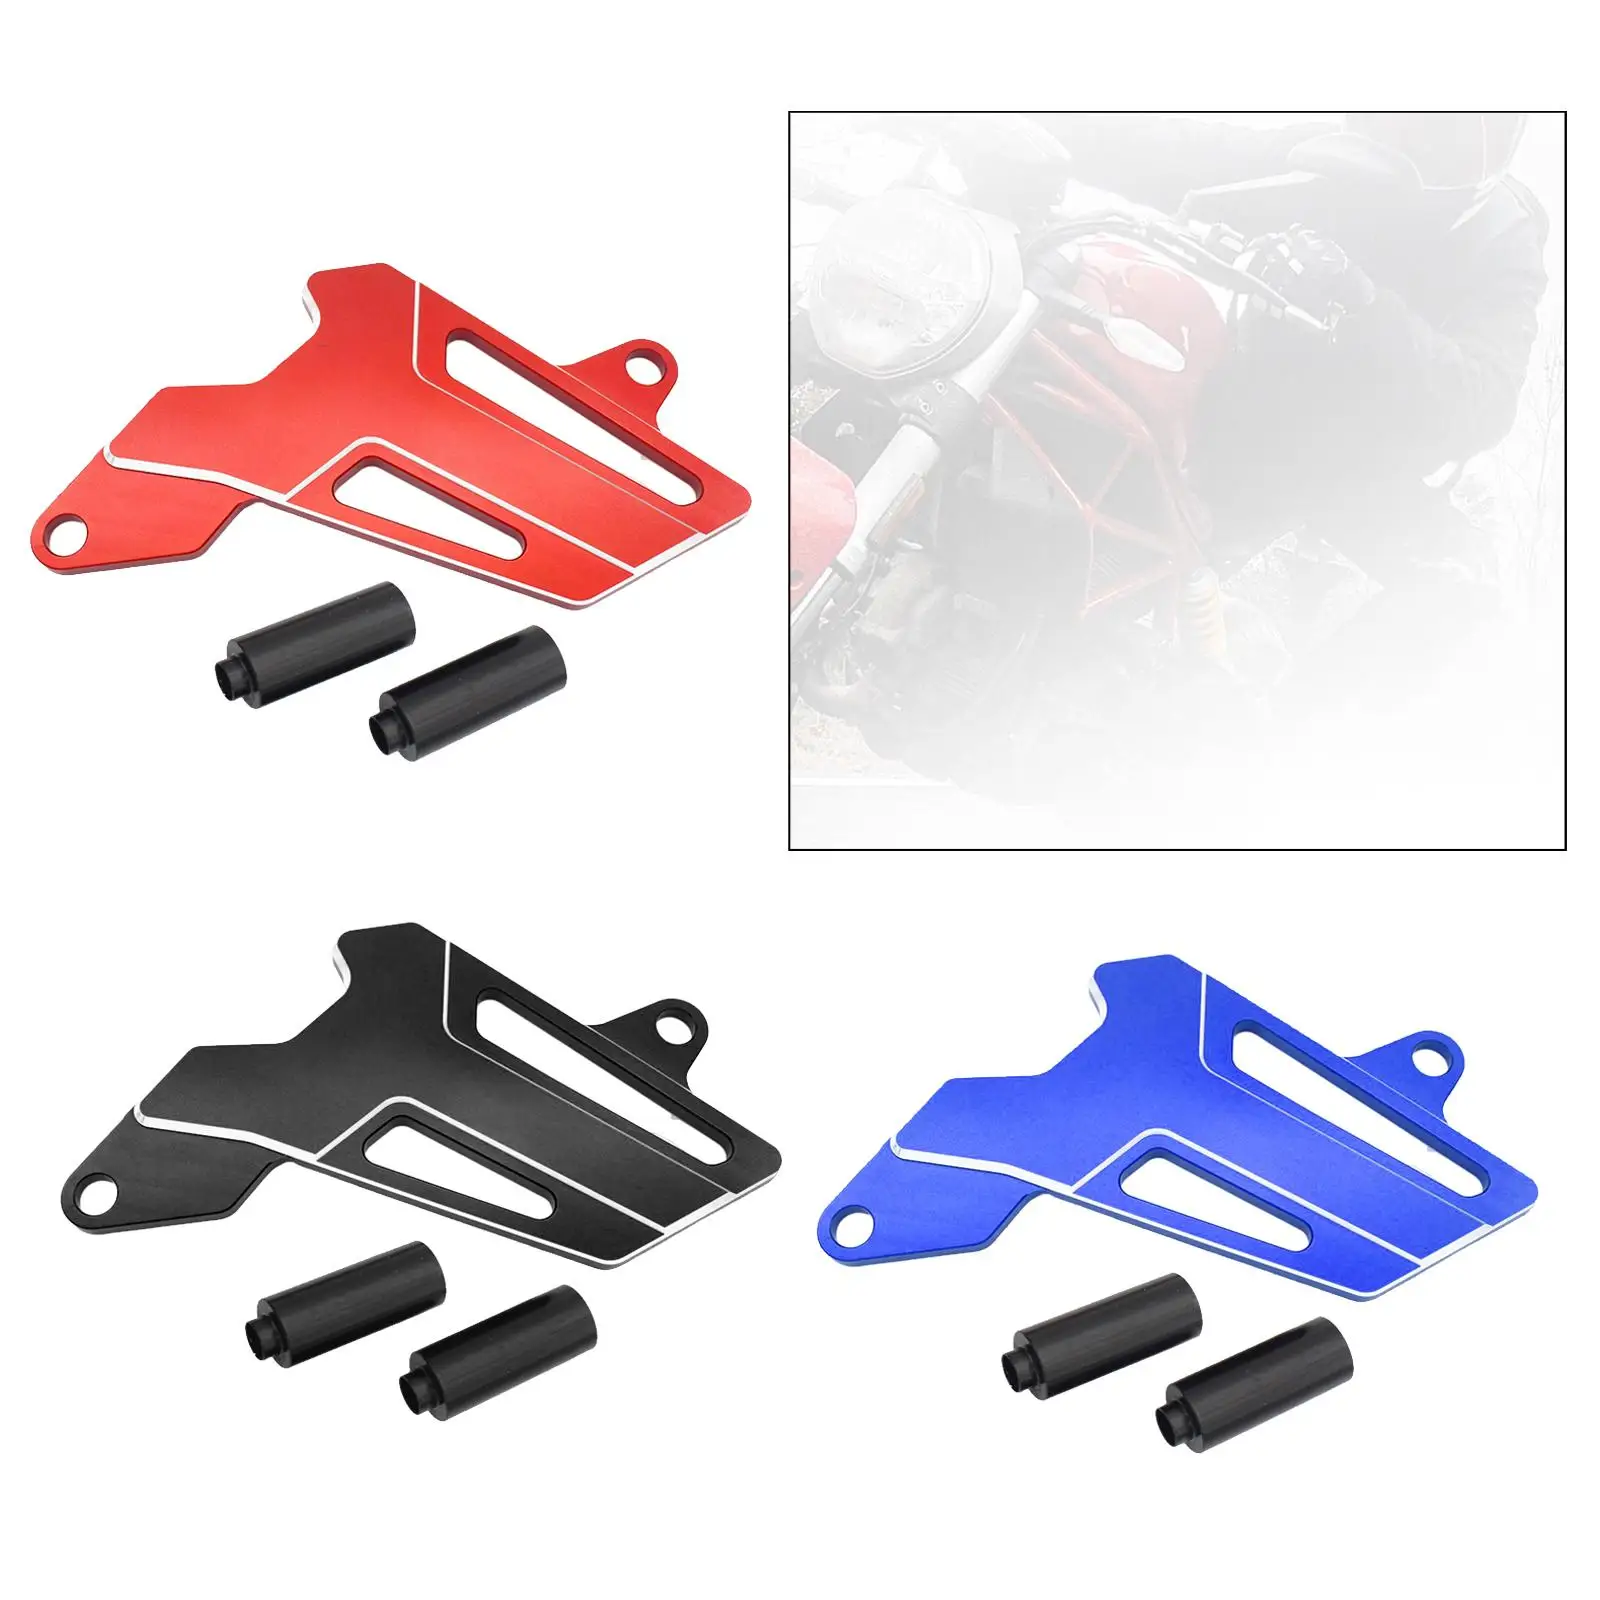 Front Sprocket Guard Chain Protector for Honda Crf250 Rally 2017-2019